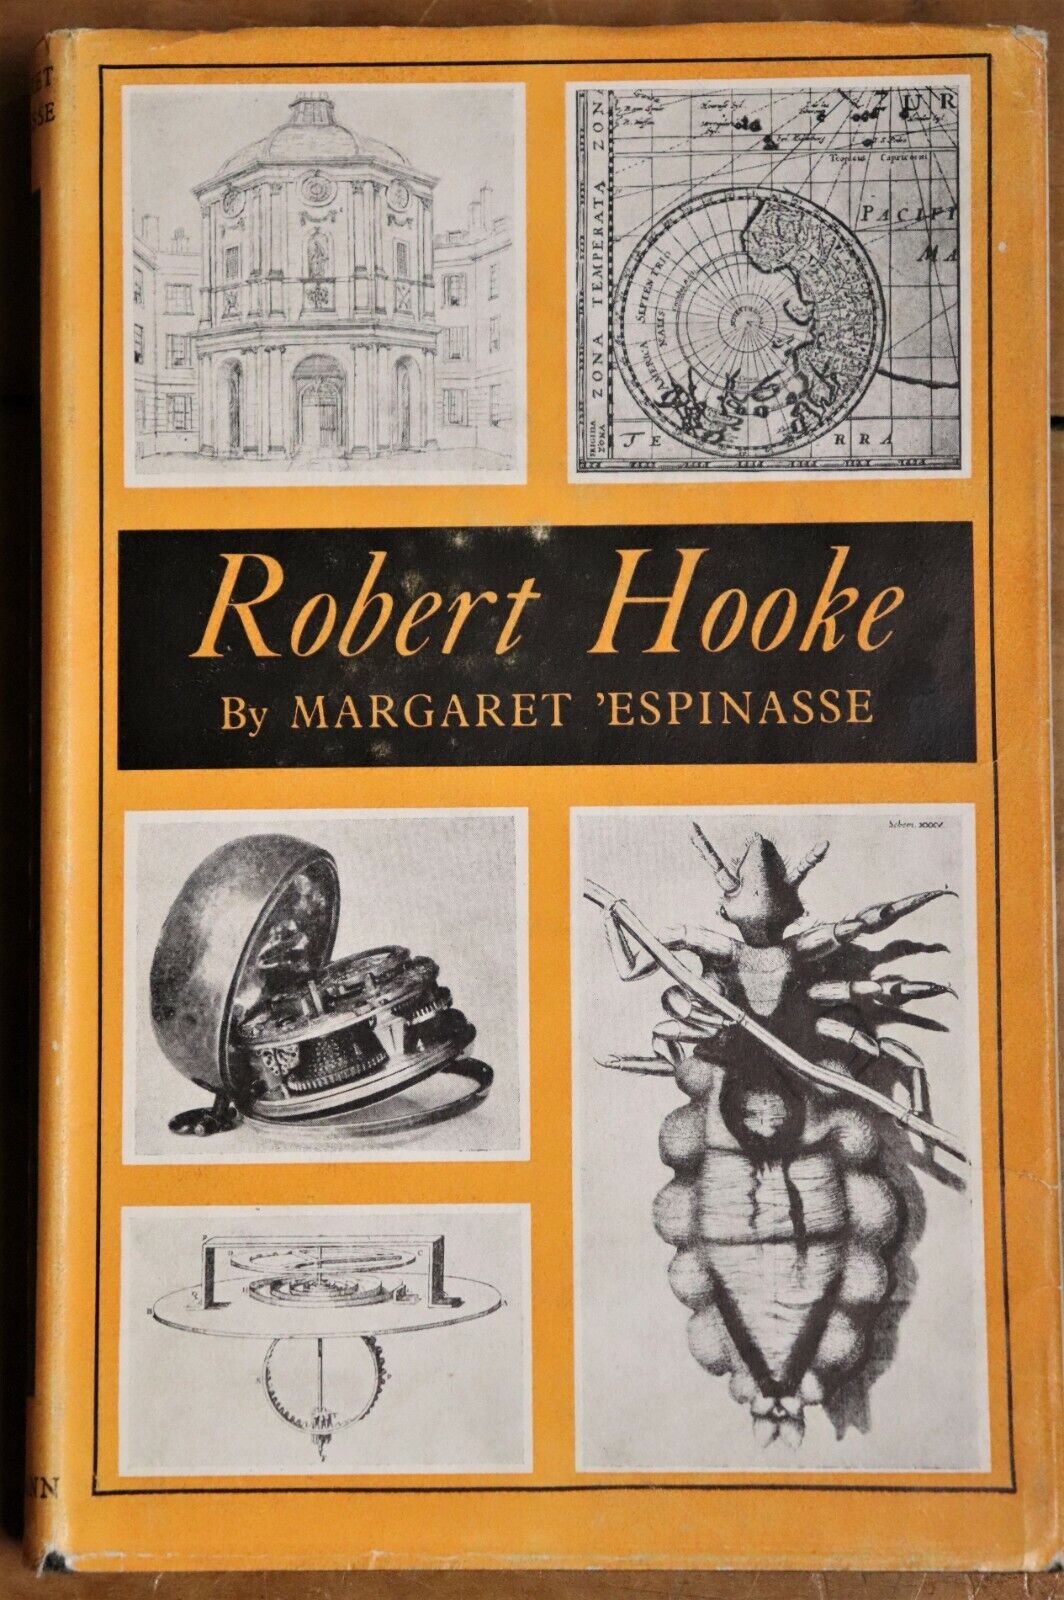 Robert Hooke by M Espinasse - 1956 - 1st Edition Vintage Science Book